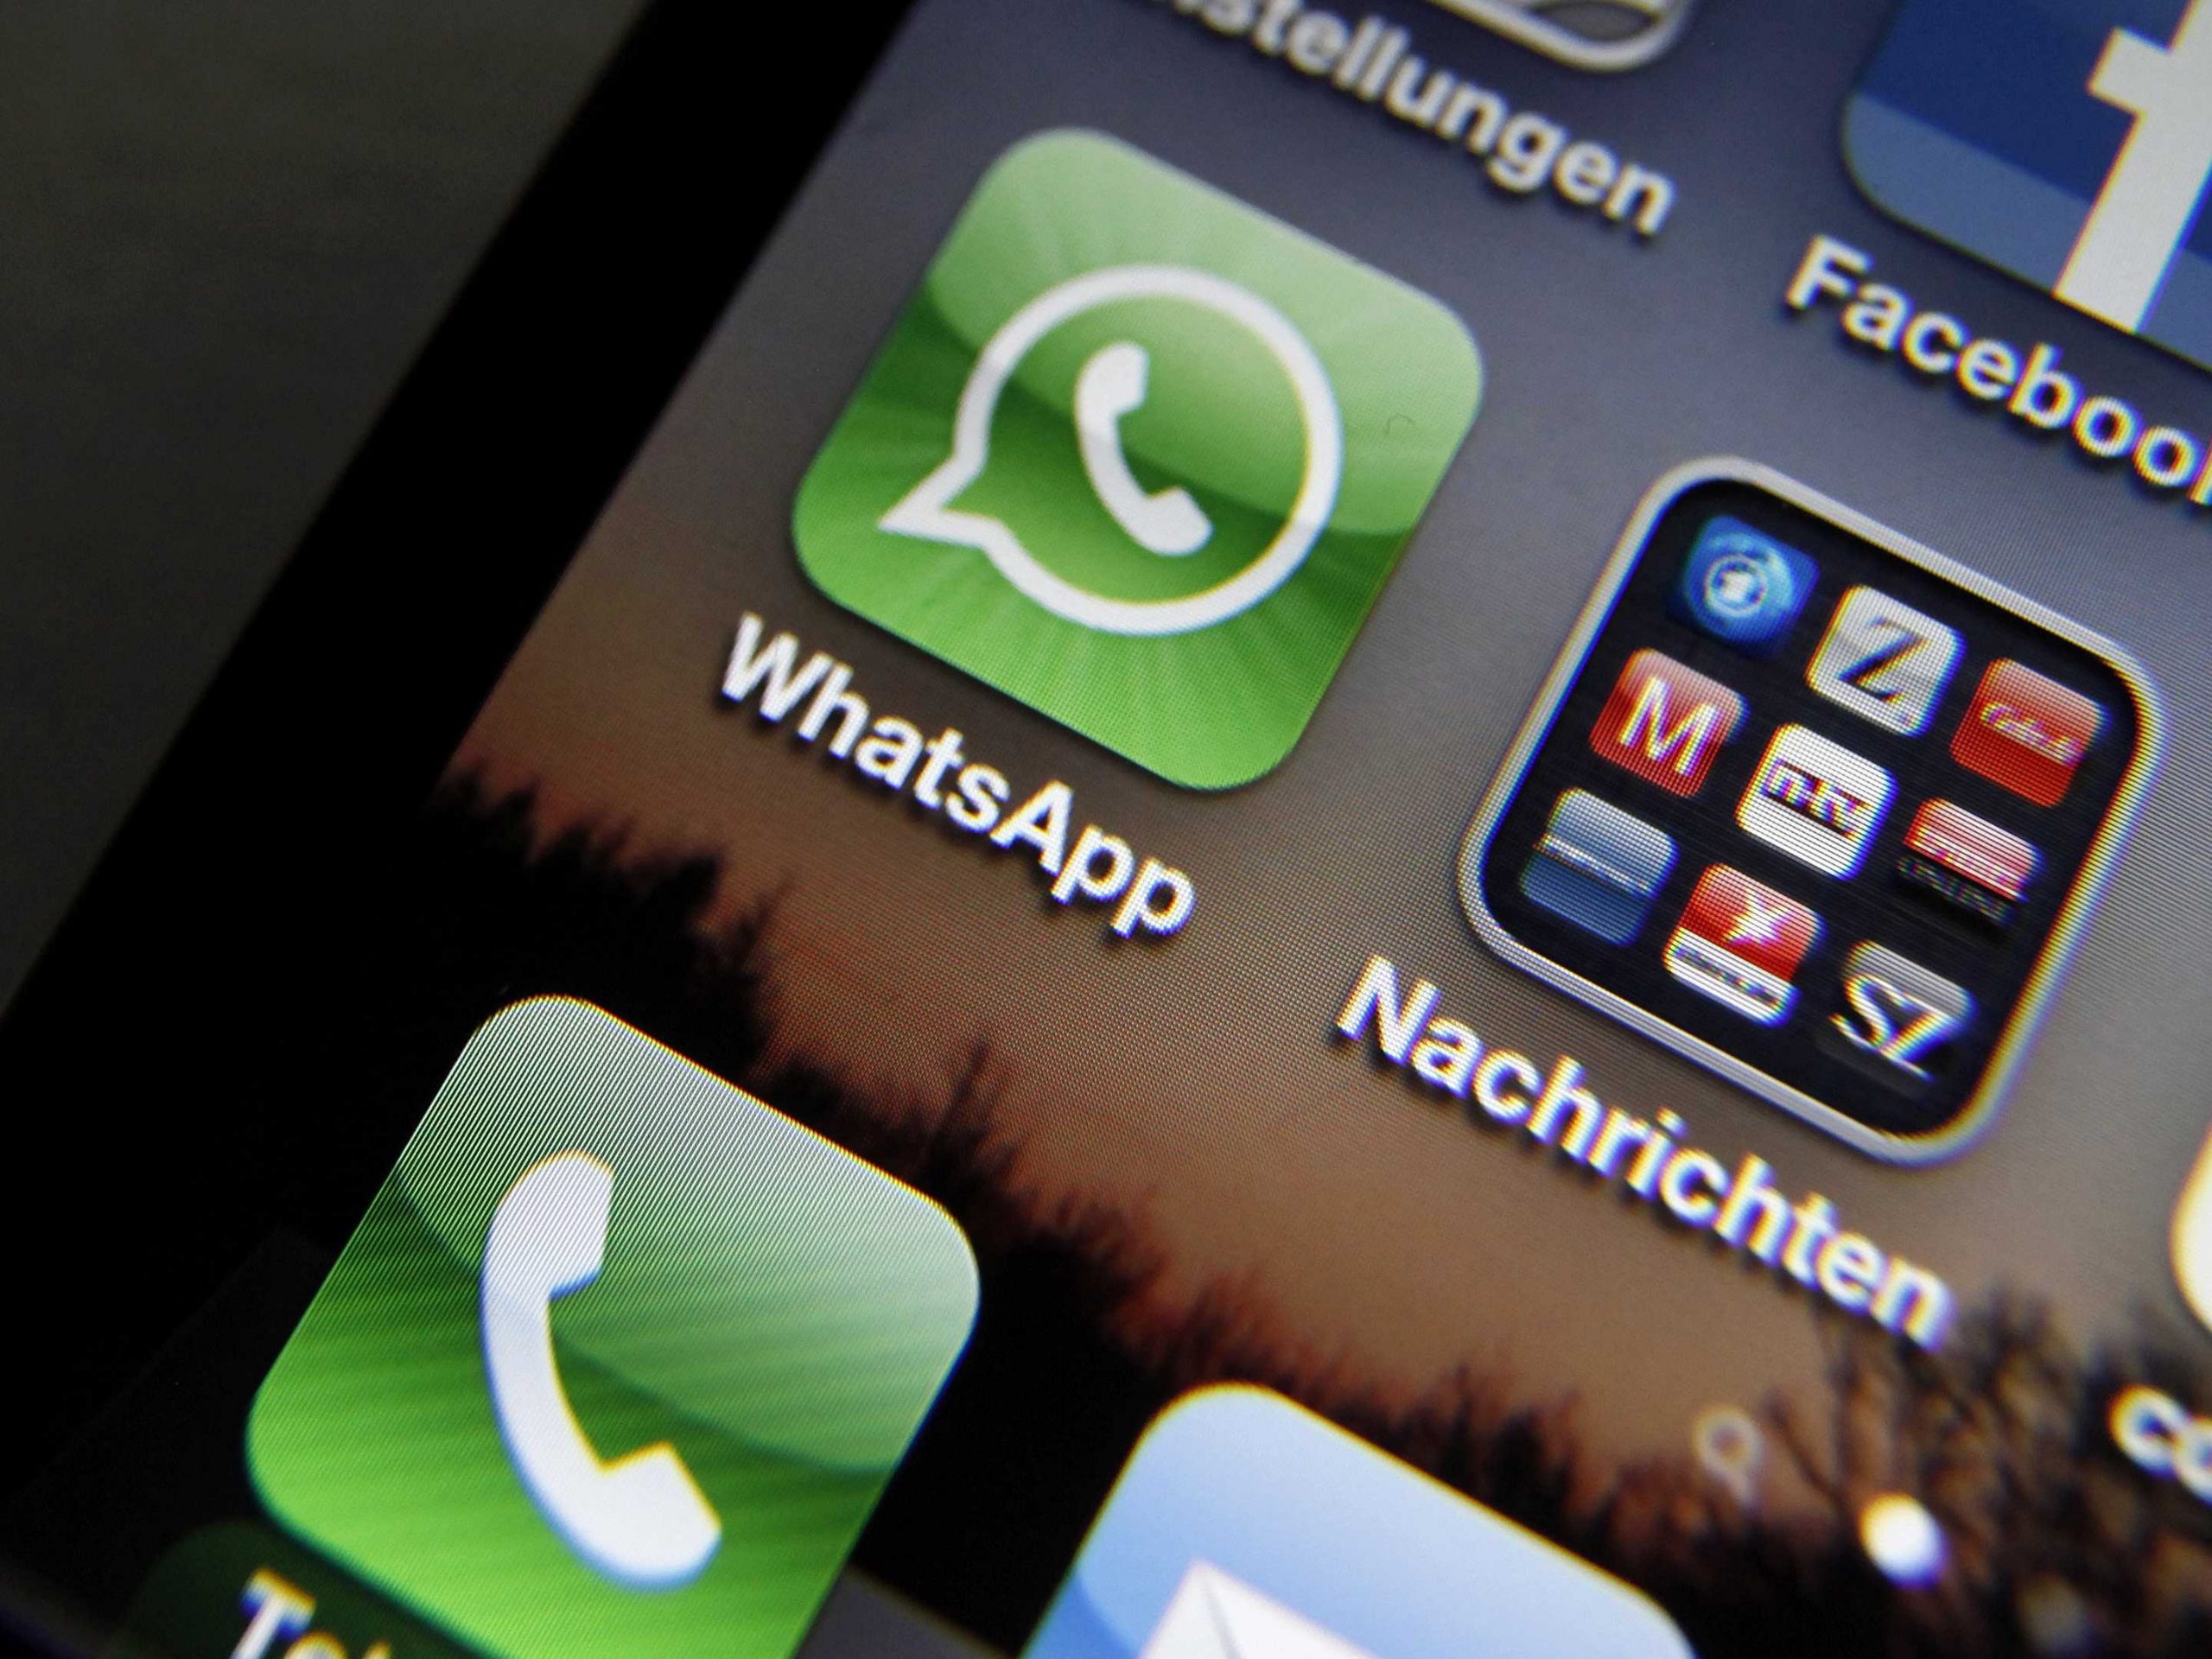 Facebook-Owned WhatsApp Launches Status Feature